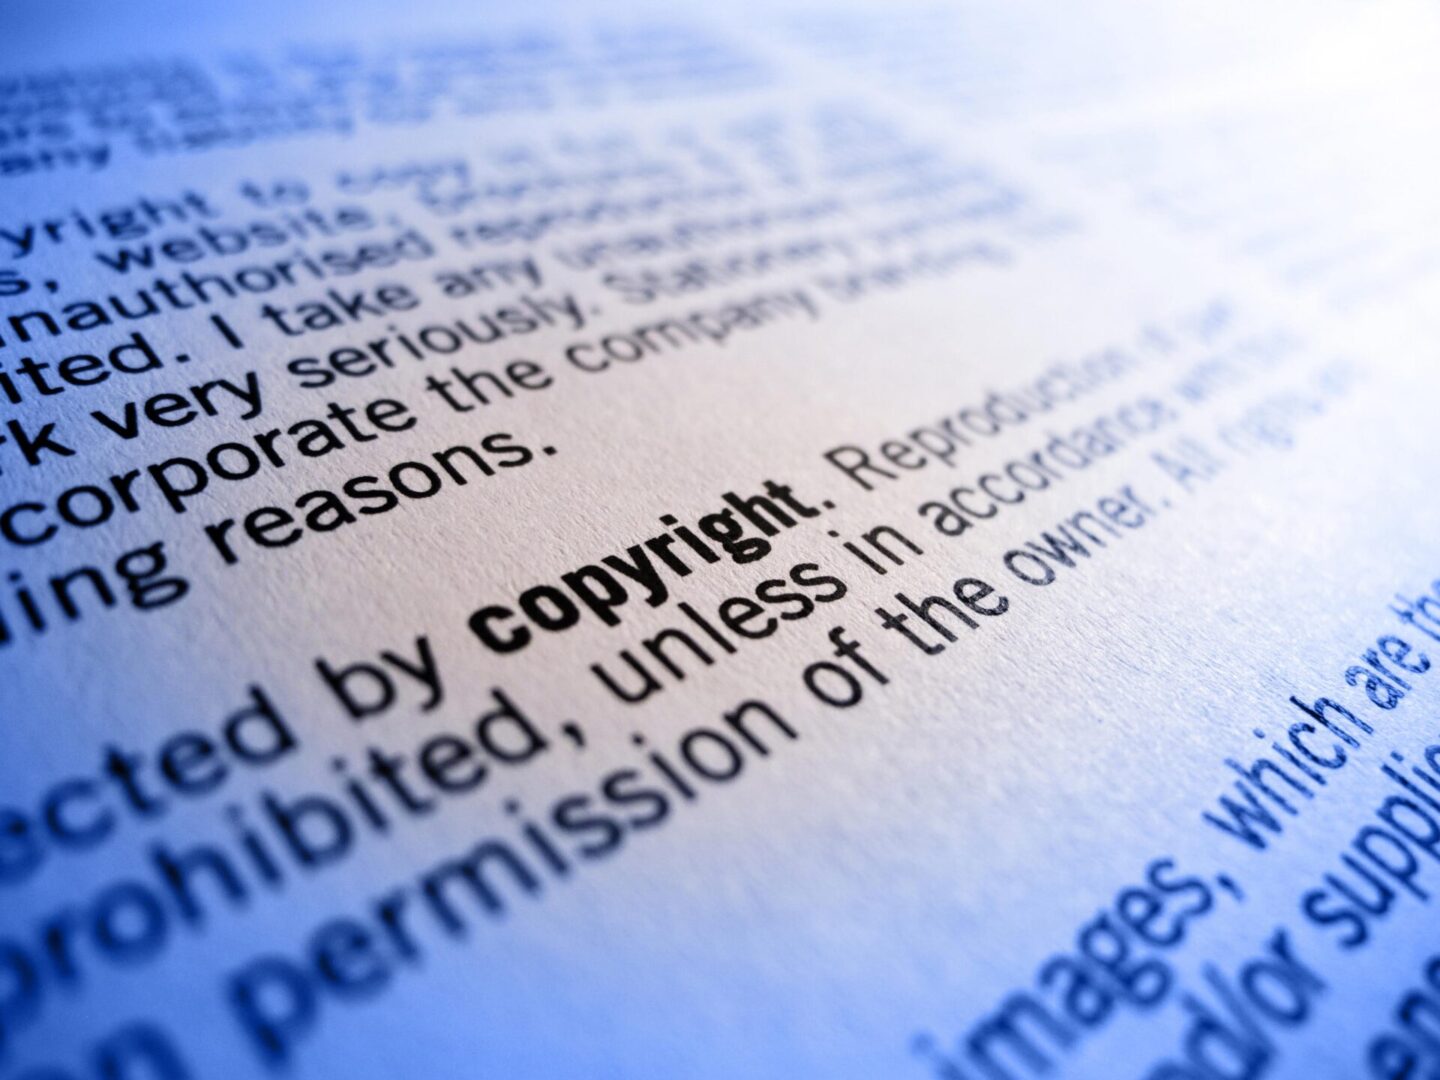 focus on  the word copyright in an agreement or treaty